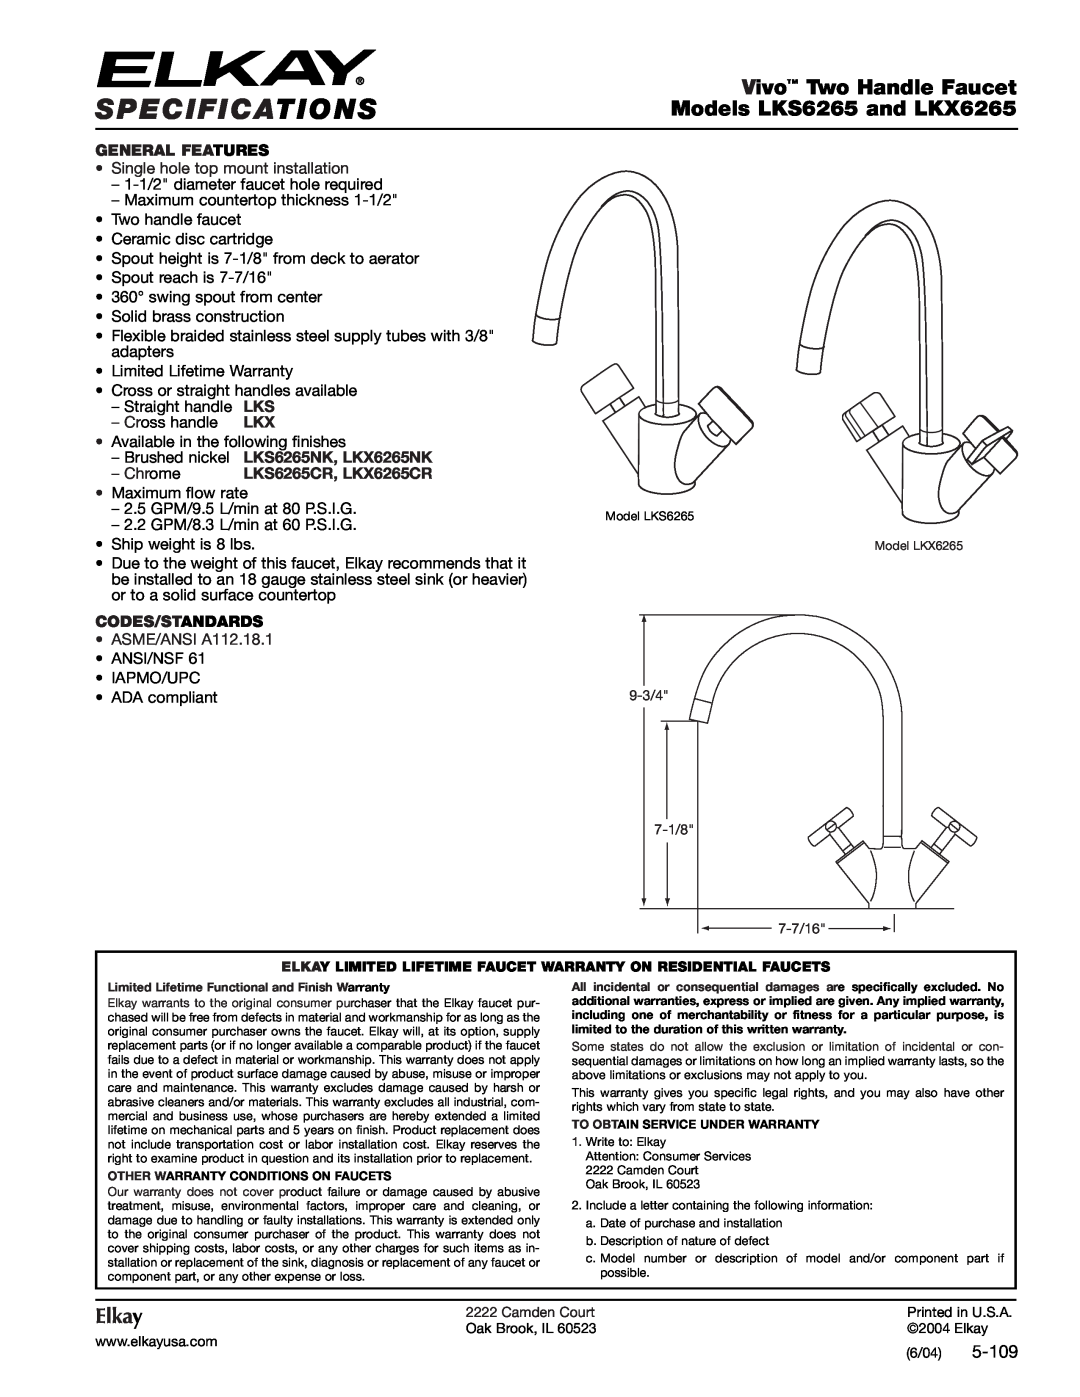 Elkay specifications Specifications, Vivo Two Handle Faucet, Models LKS6265 and LKX6265, Elkay, 5-109, General Features 